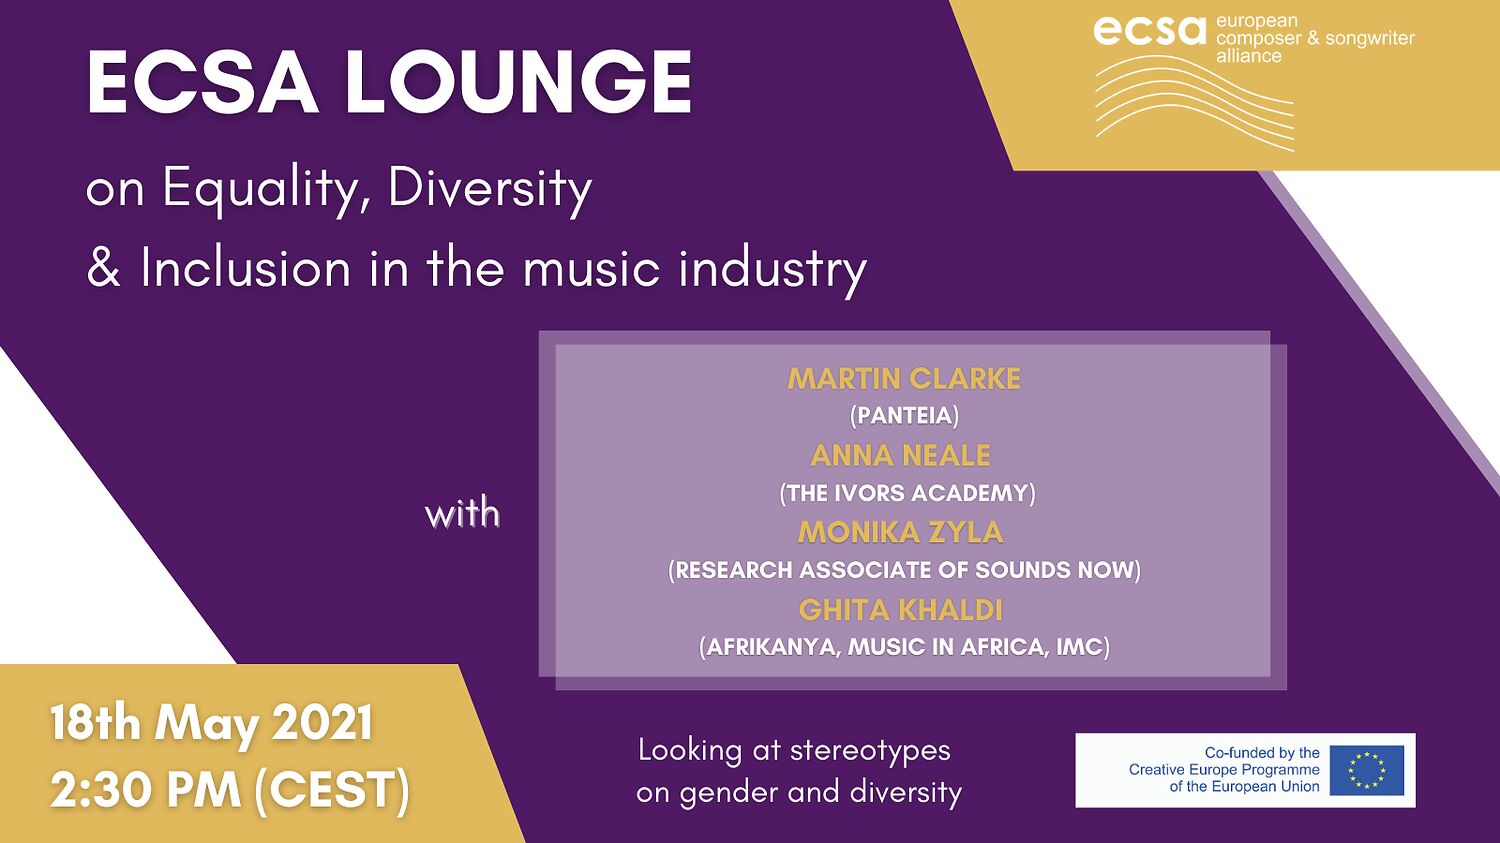 ECSA Lounge on Gender equality, Diversity and Inclusion in the Music industry